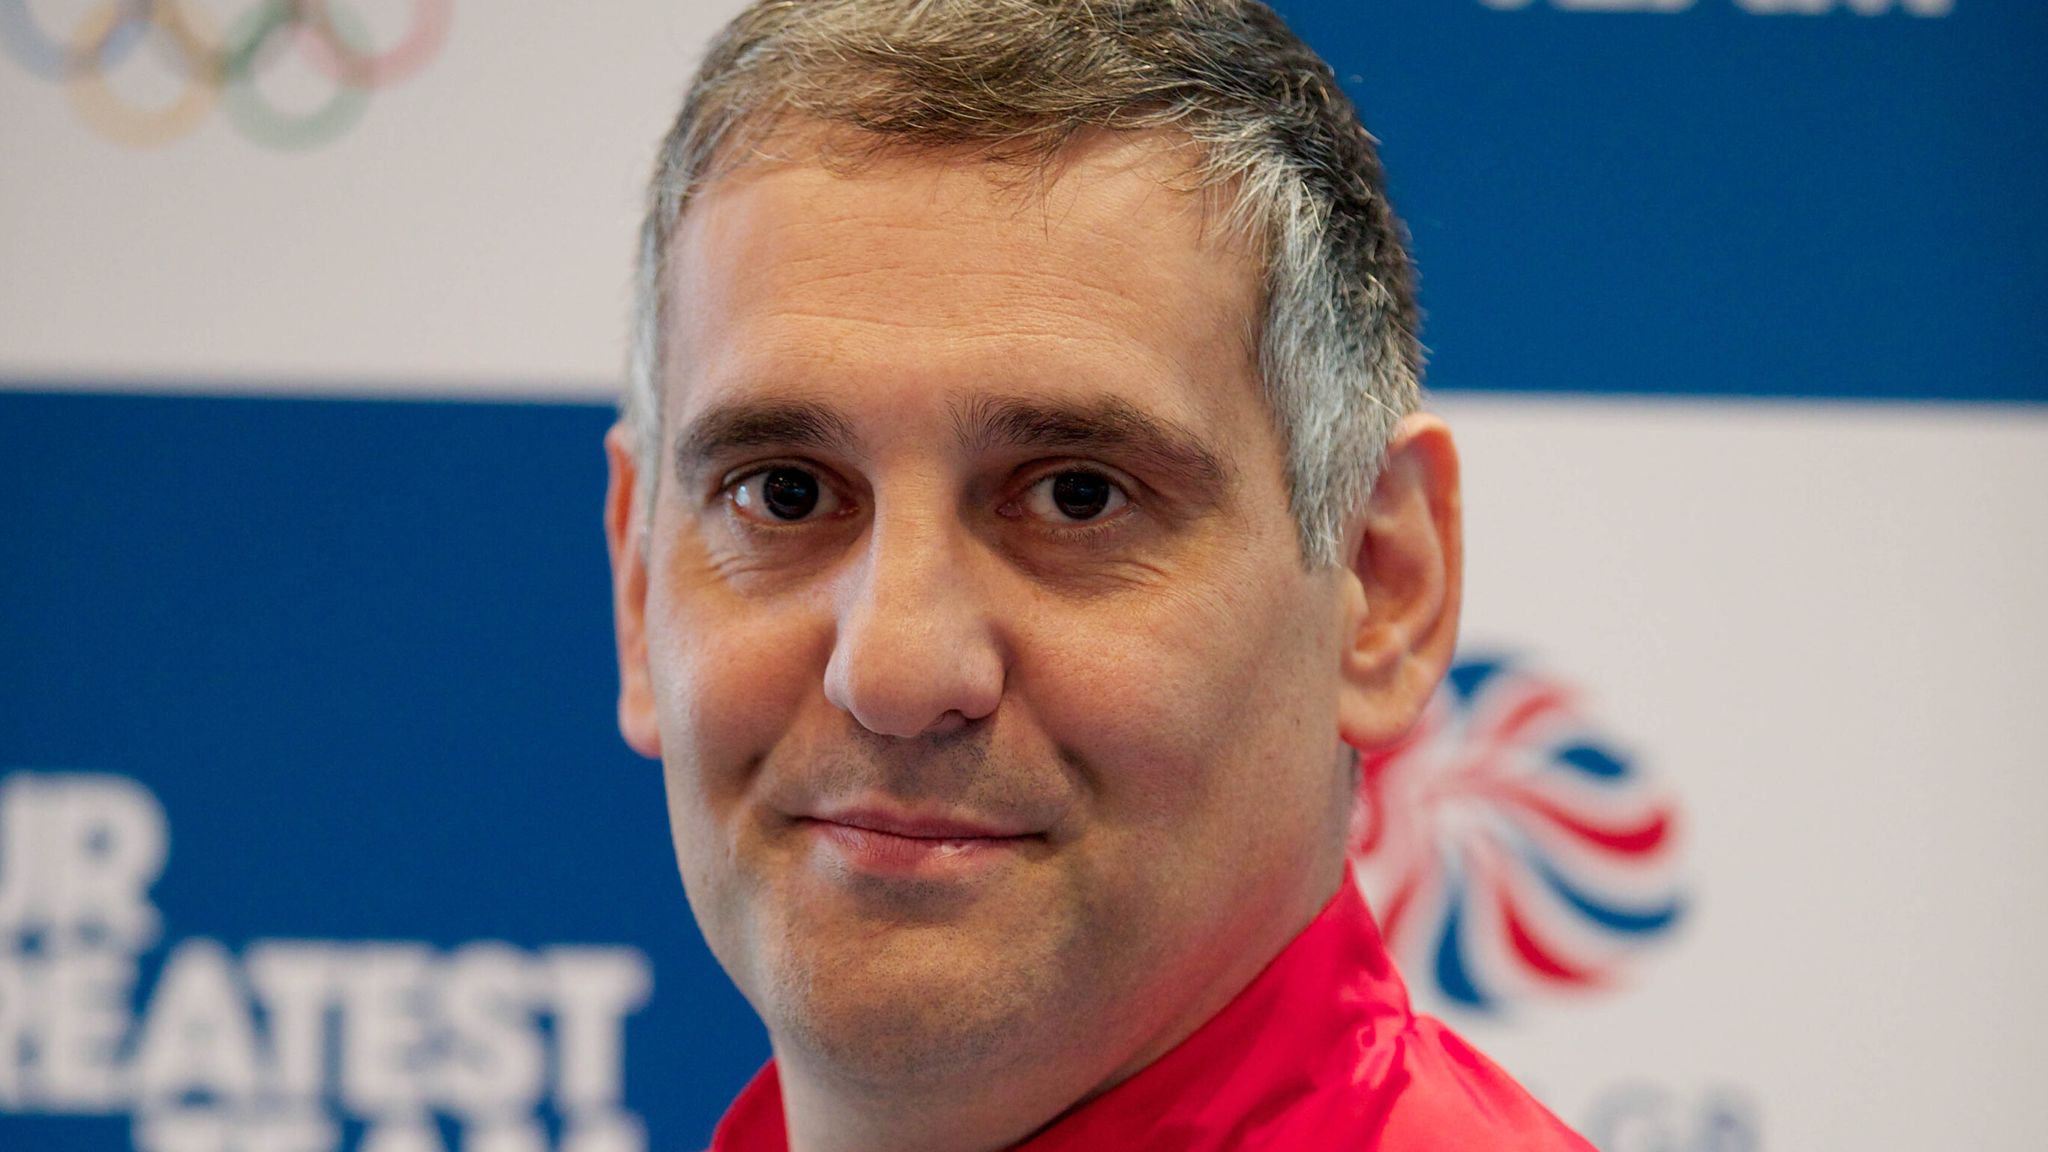 UK Track and field coach Toni Minichiello banned for life over sexually inappropriate conduct